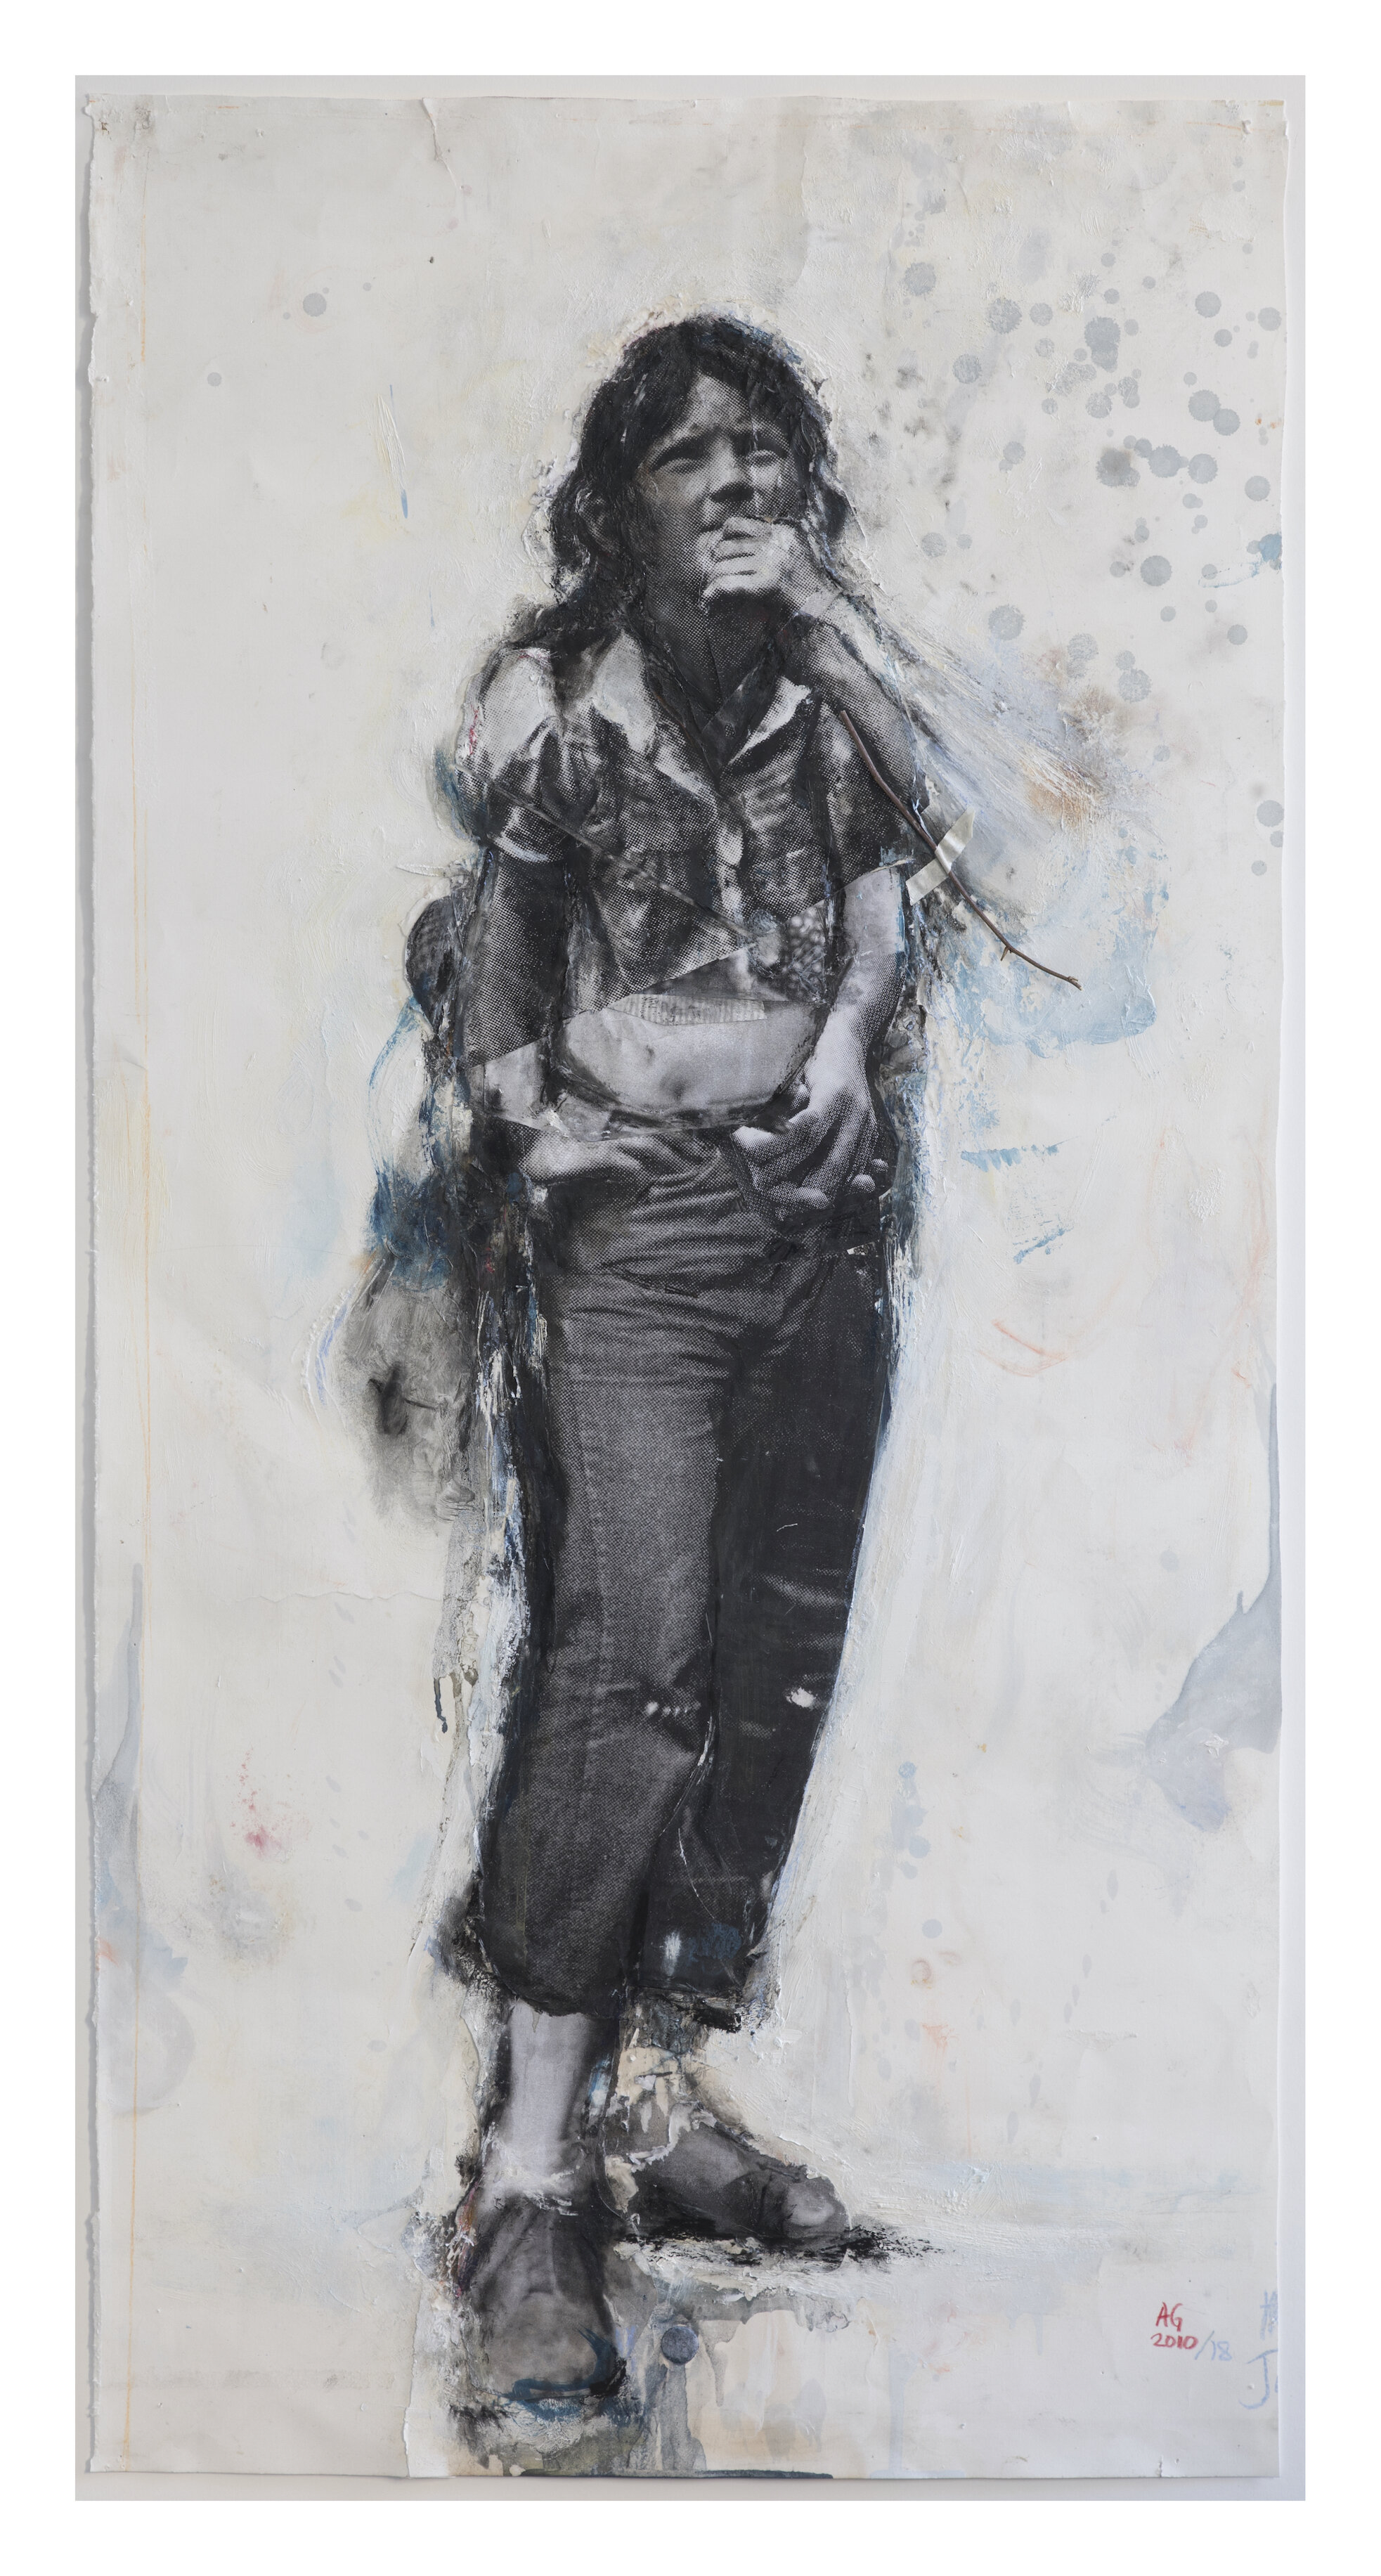  Angela Grossmann, Tomboy, 2010-18, Collage on Paper, 58 x 29.5 inches framed 